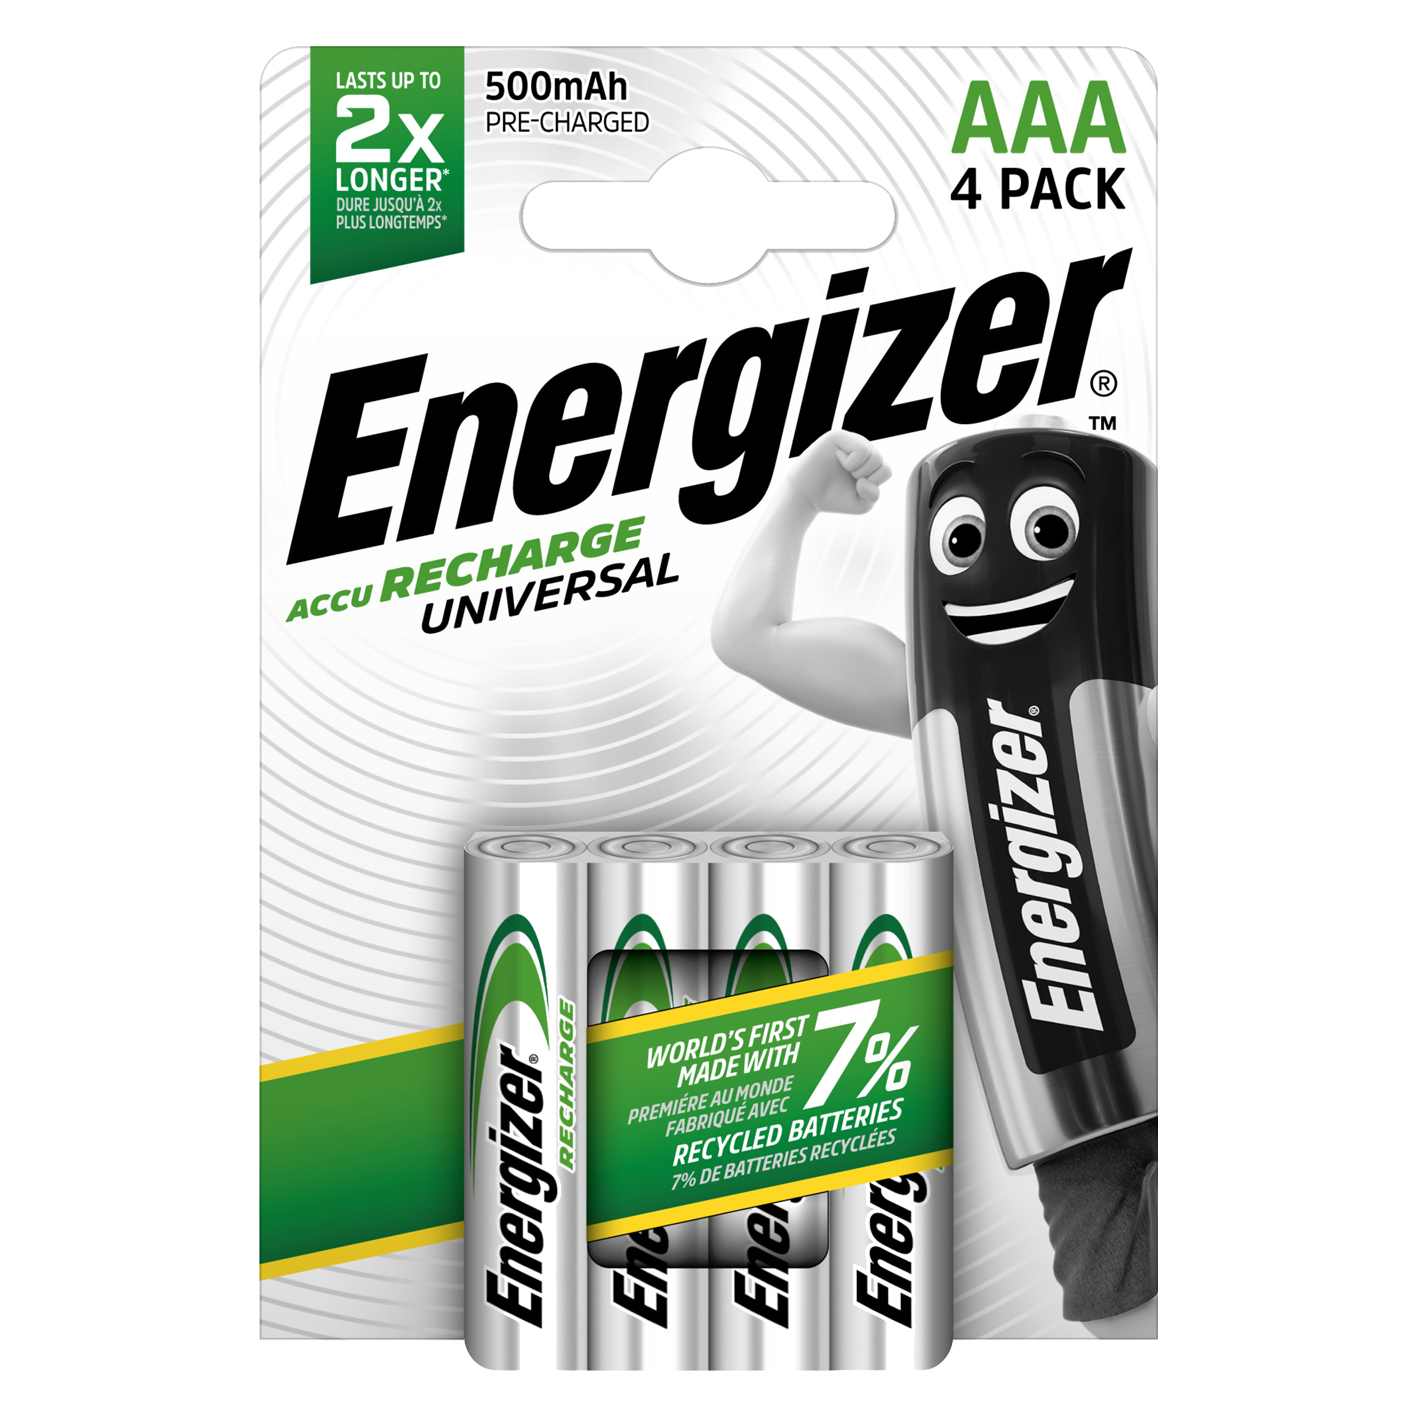 Energizer AAA 500mAh Recharge Universal, Pack of 4